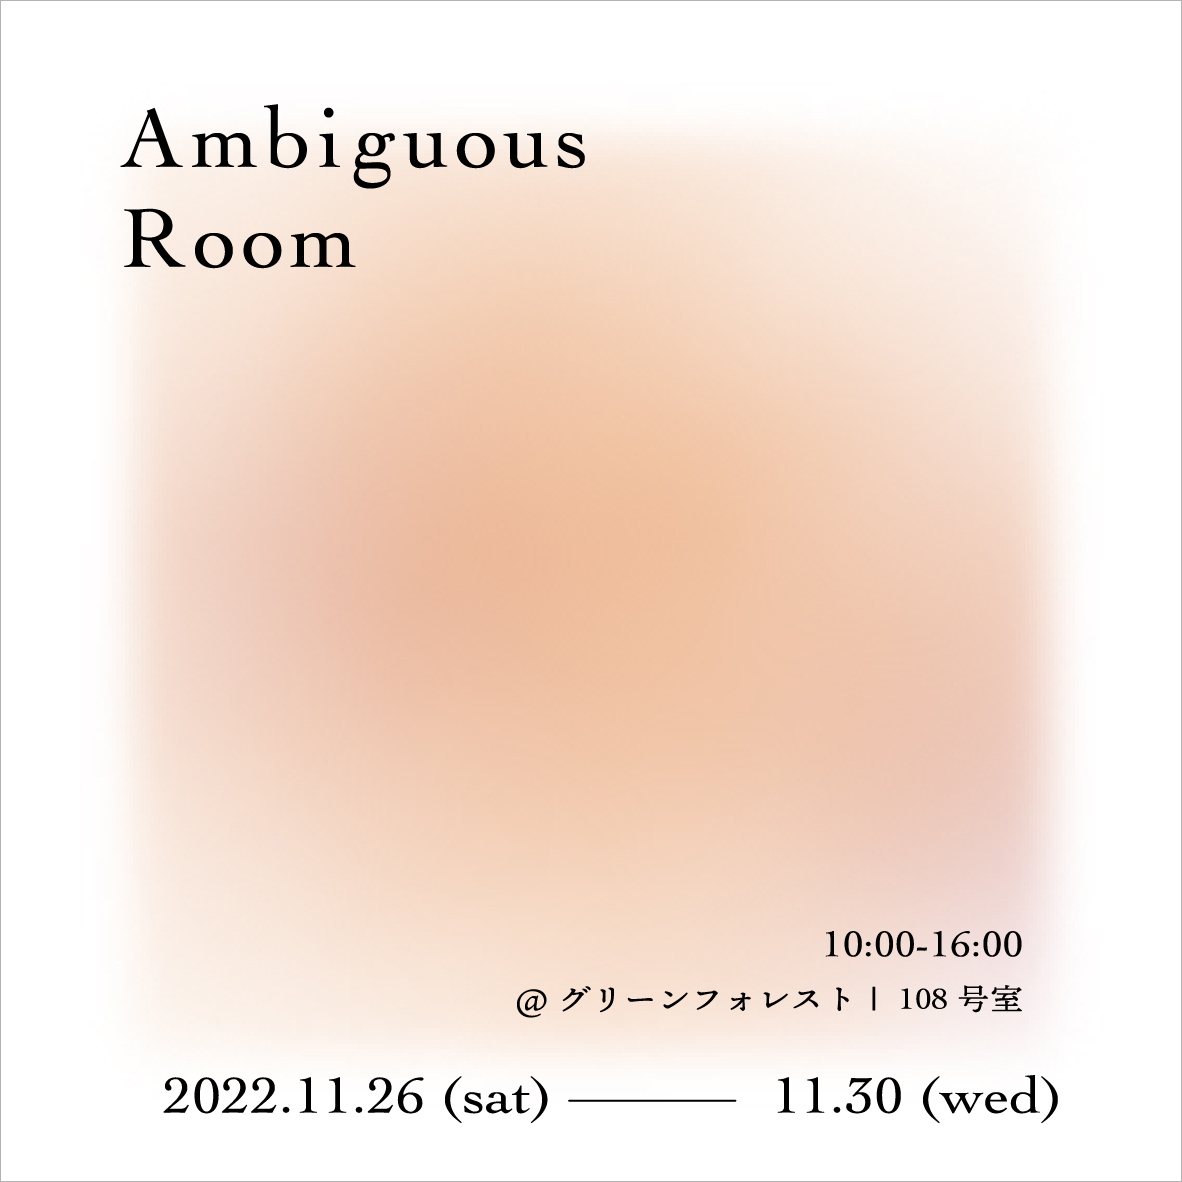 Ambiguous Room